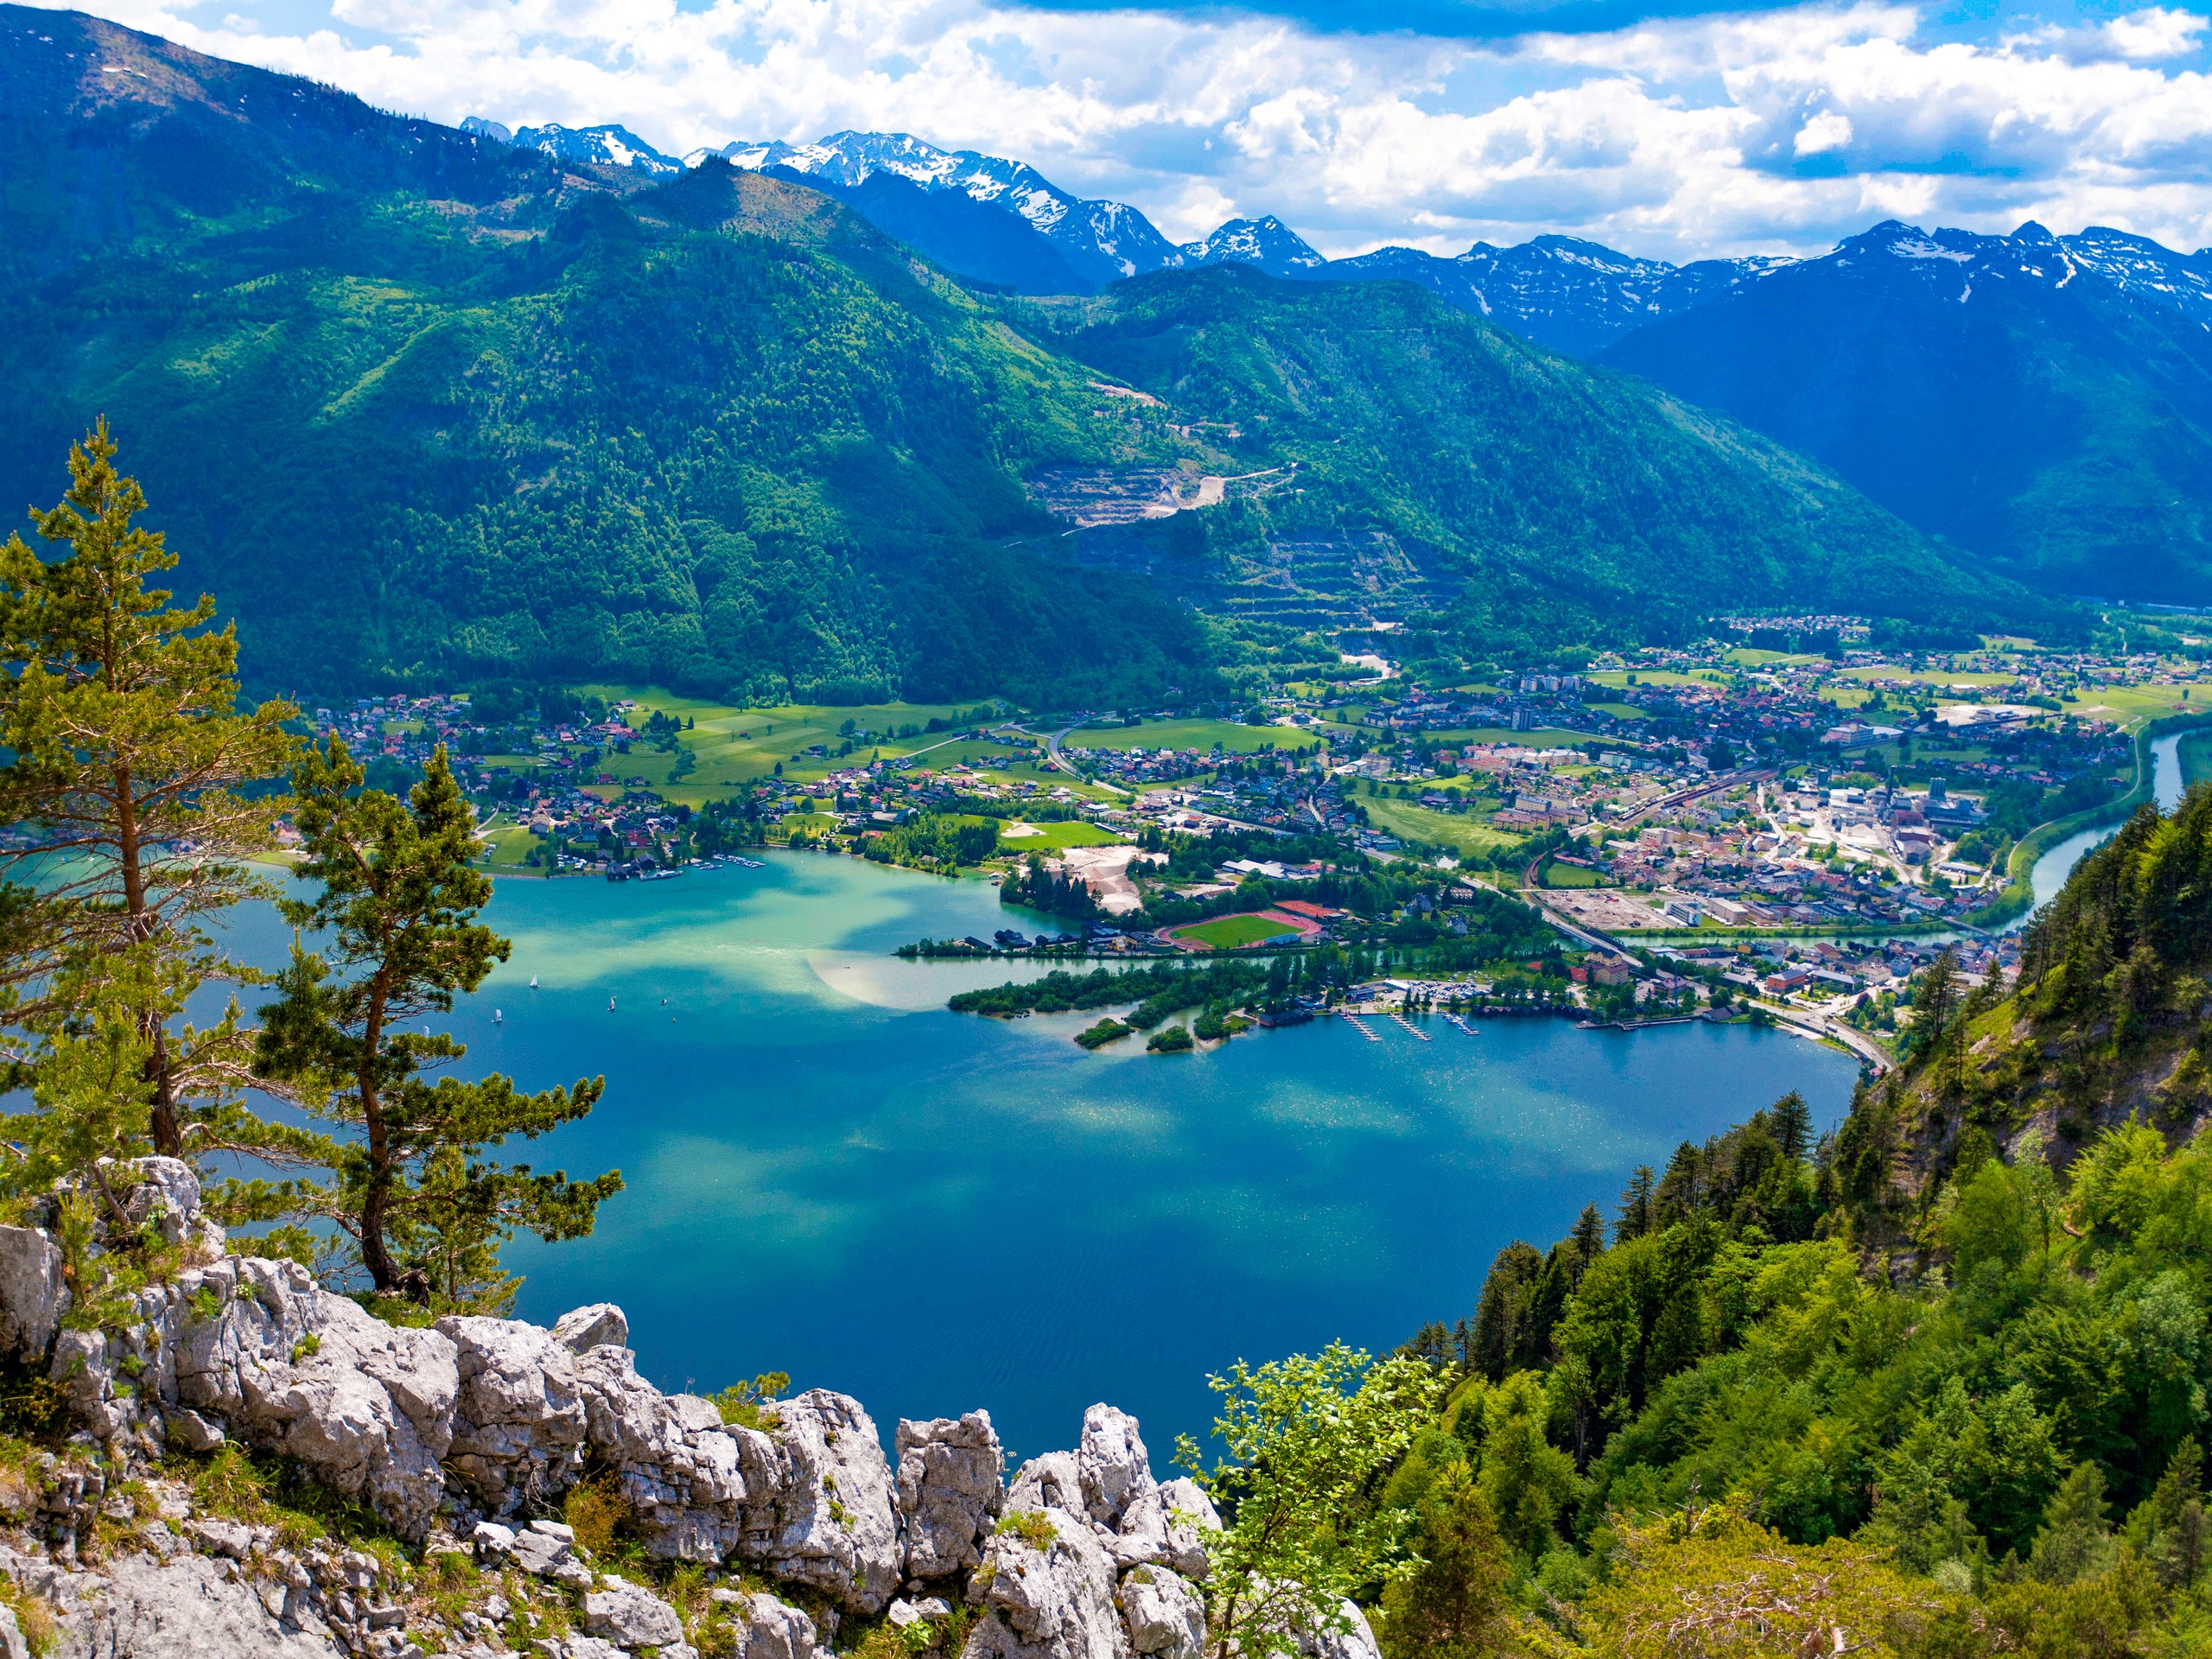 Traunsee as seen from the above while biking the Salzkammergut region in Austria